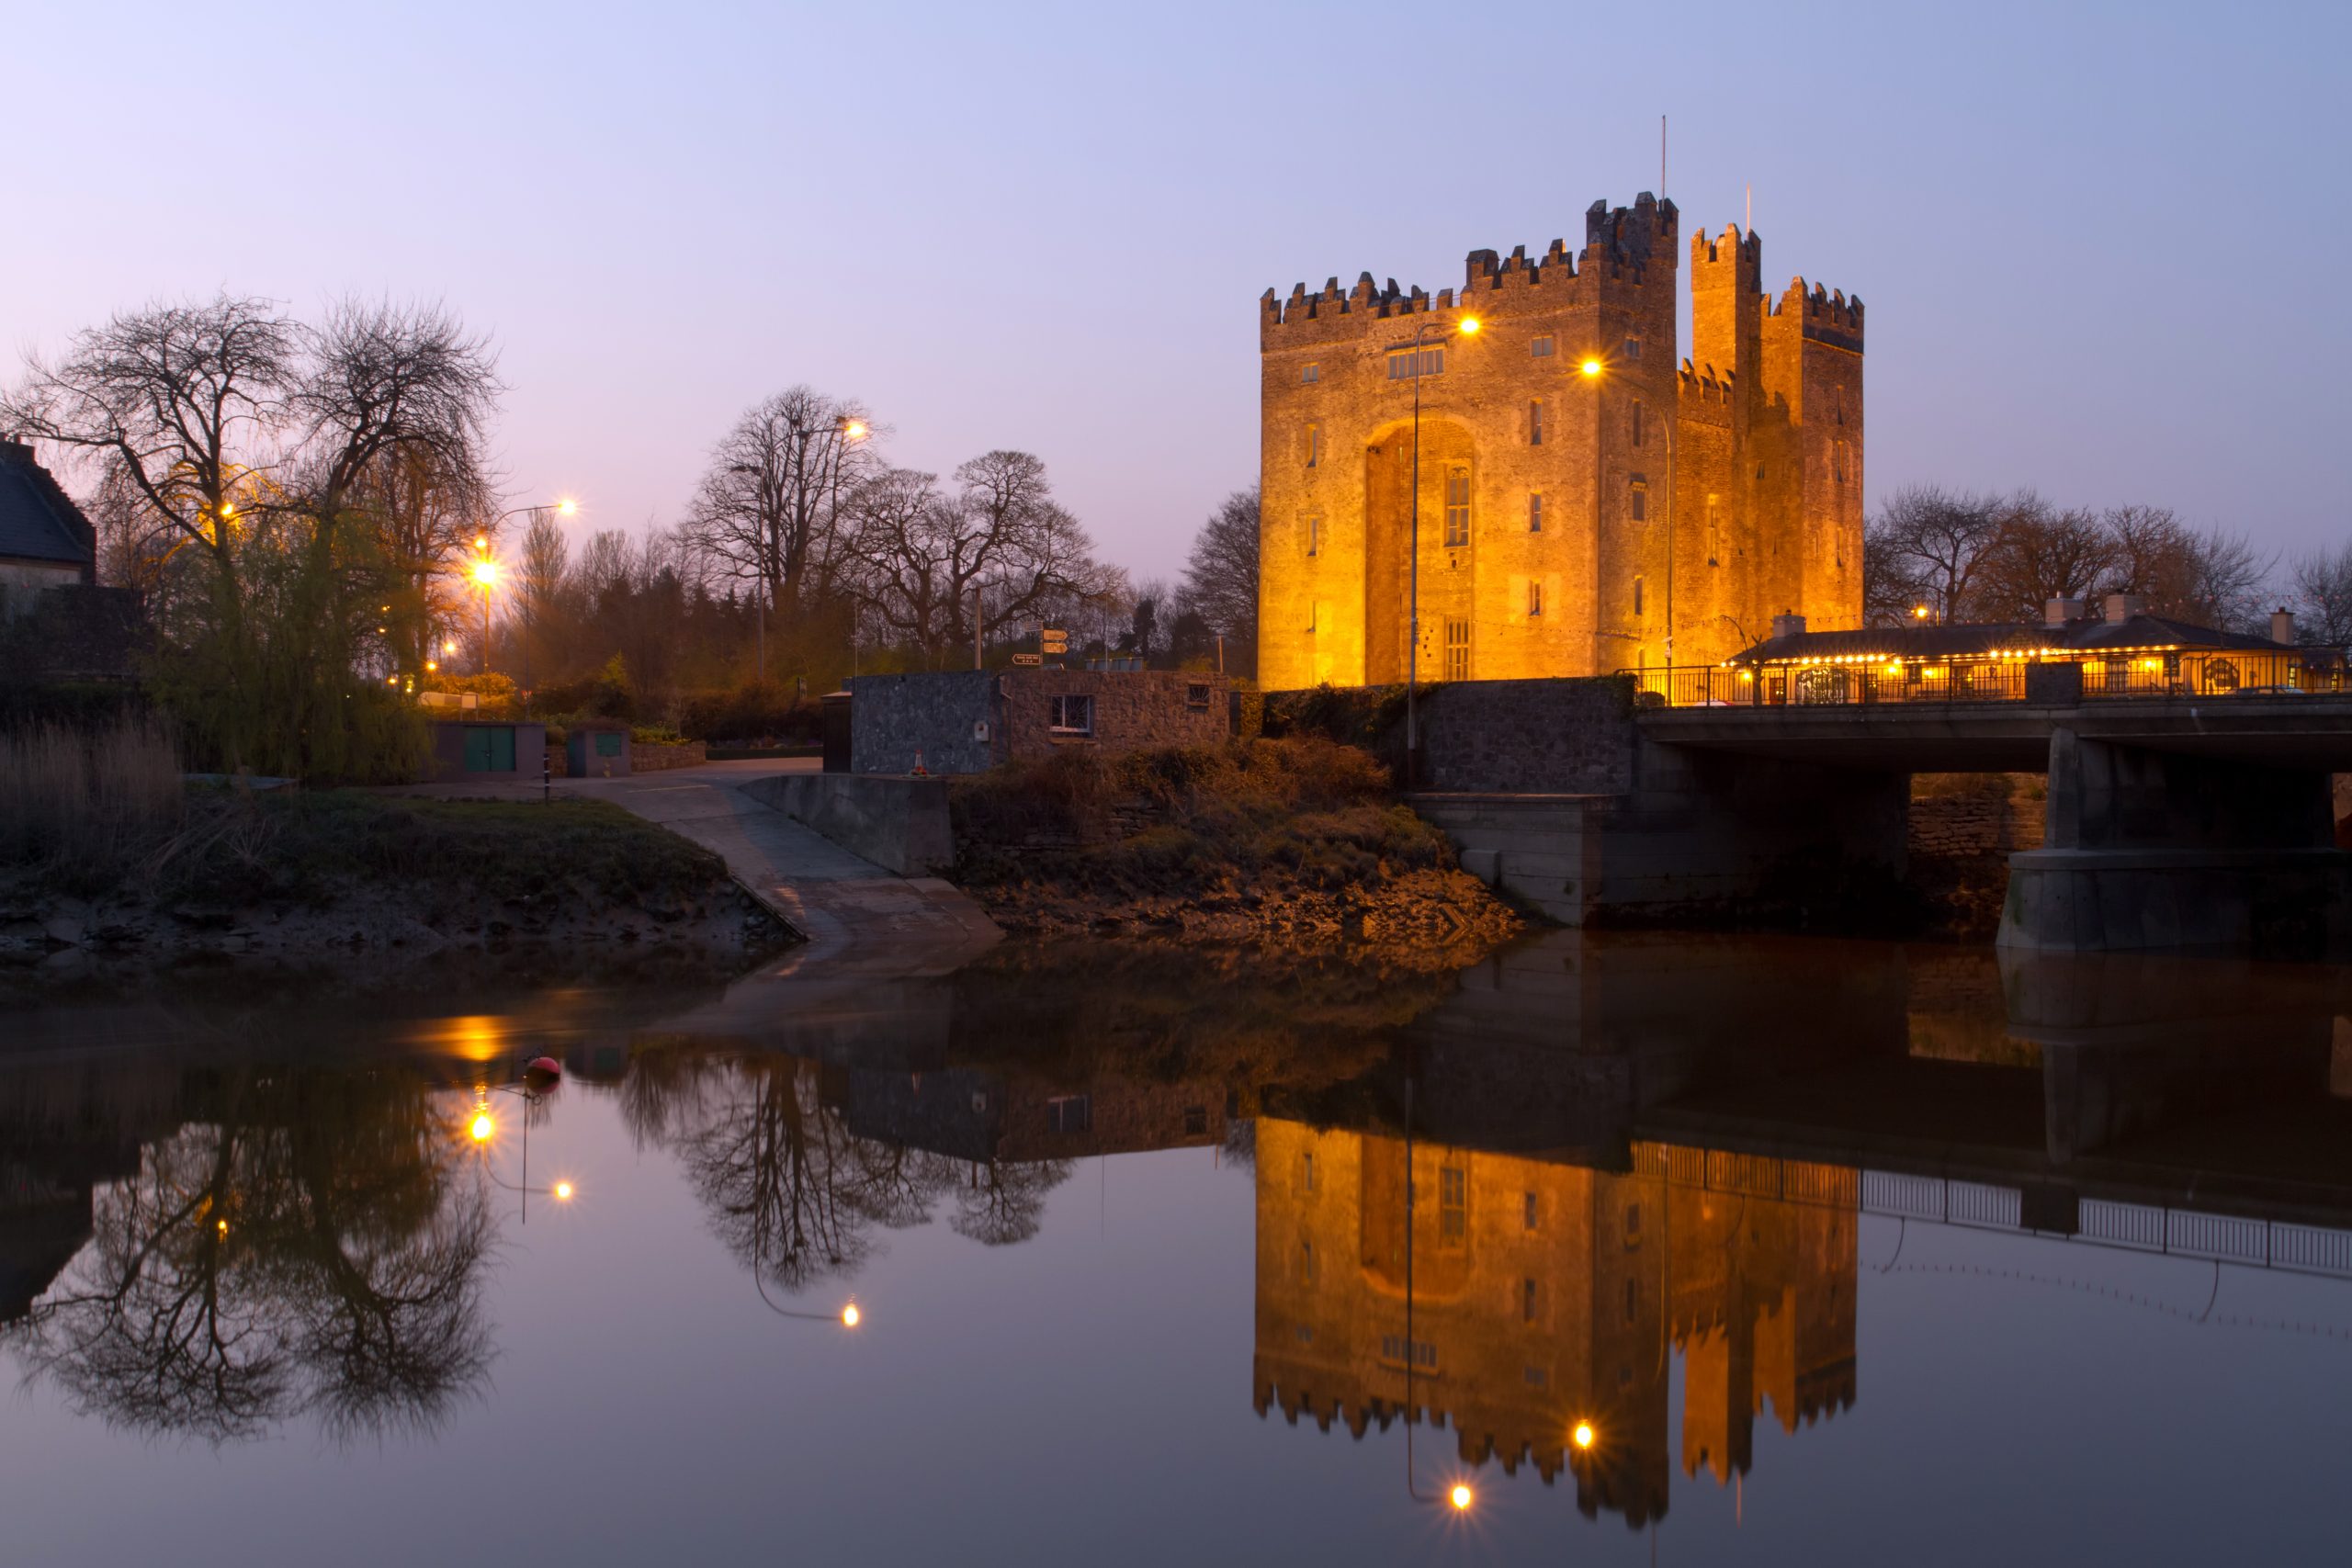 Bunratty castle at dusk